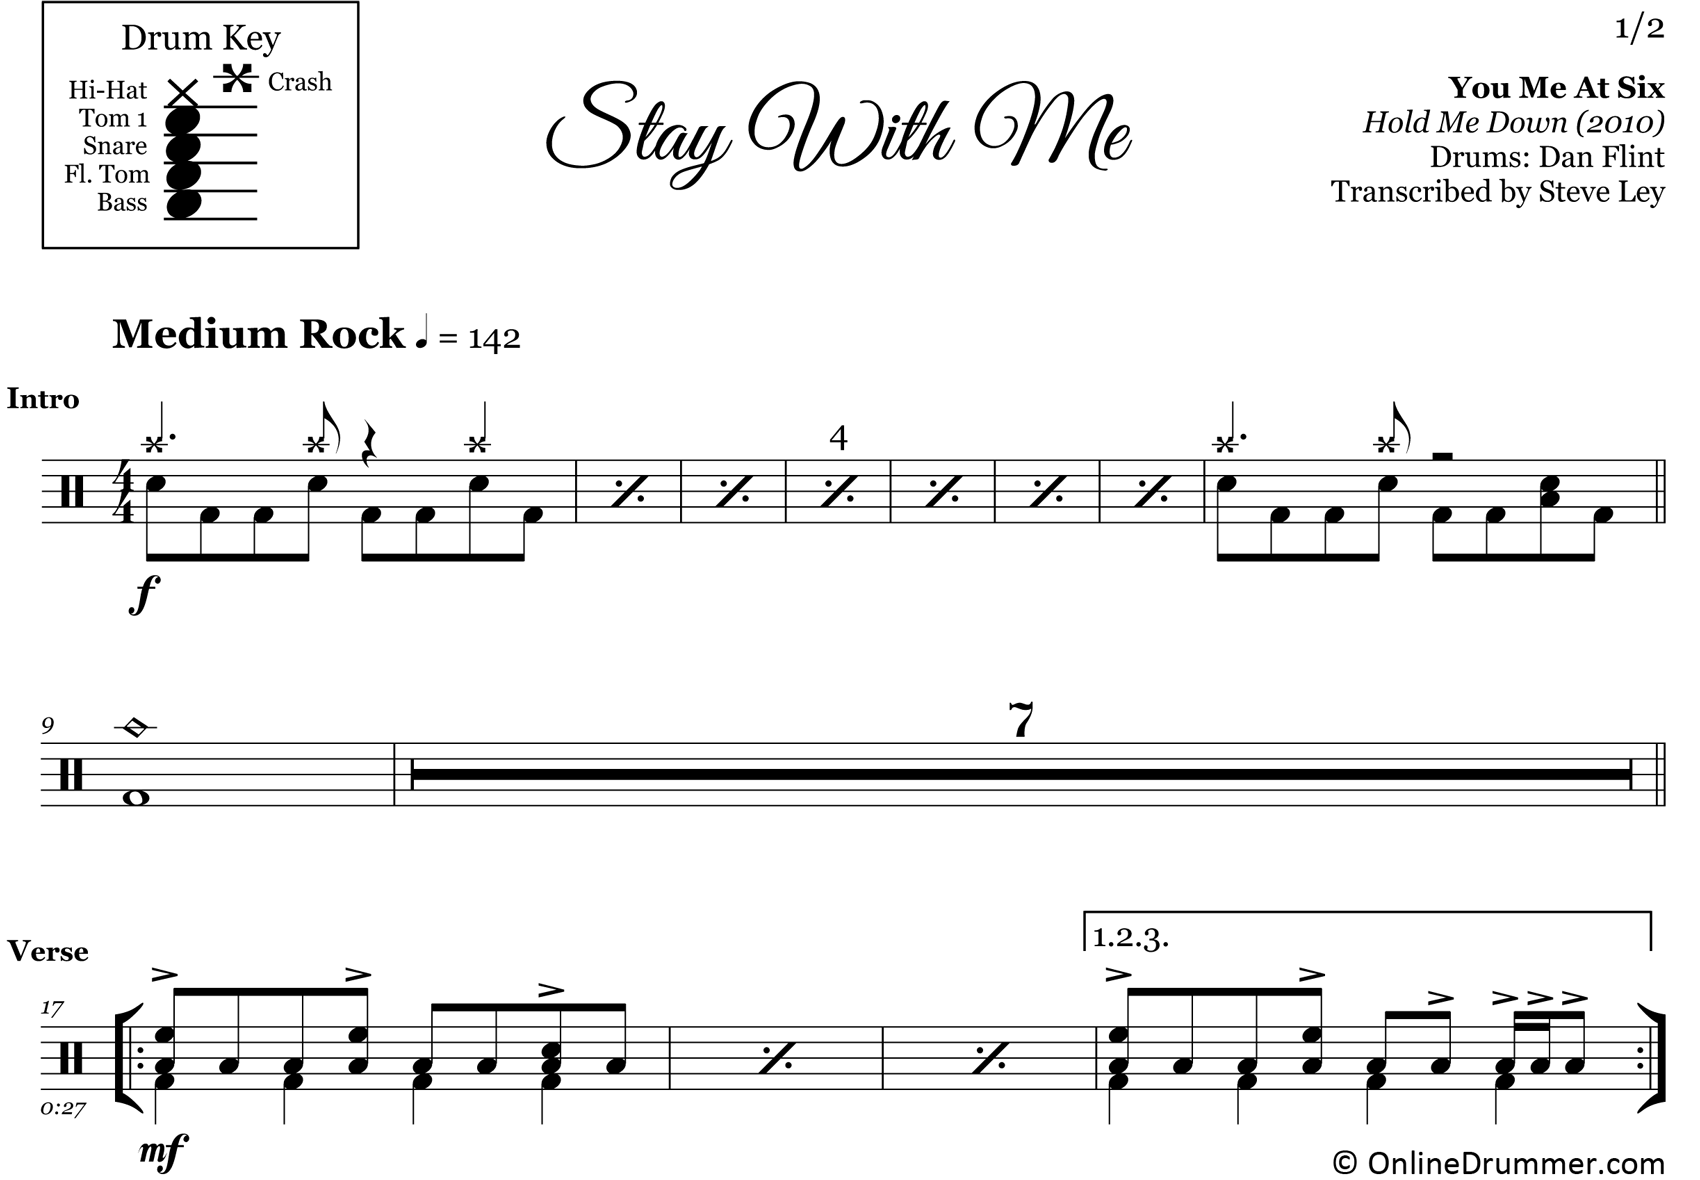 Stay With Me - You Me At Six - Drum Sheet Music